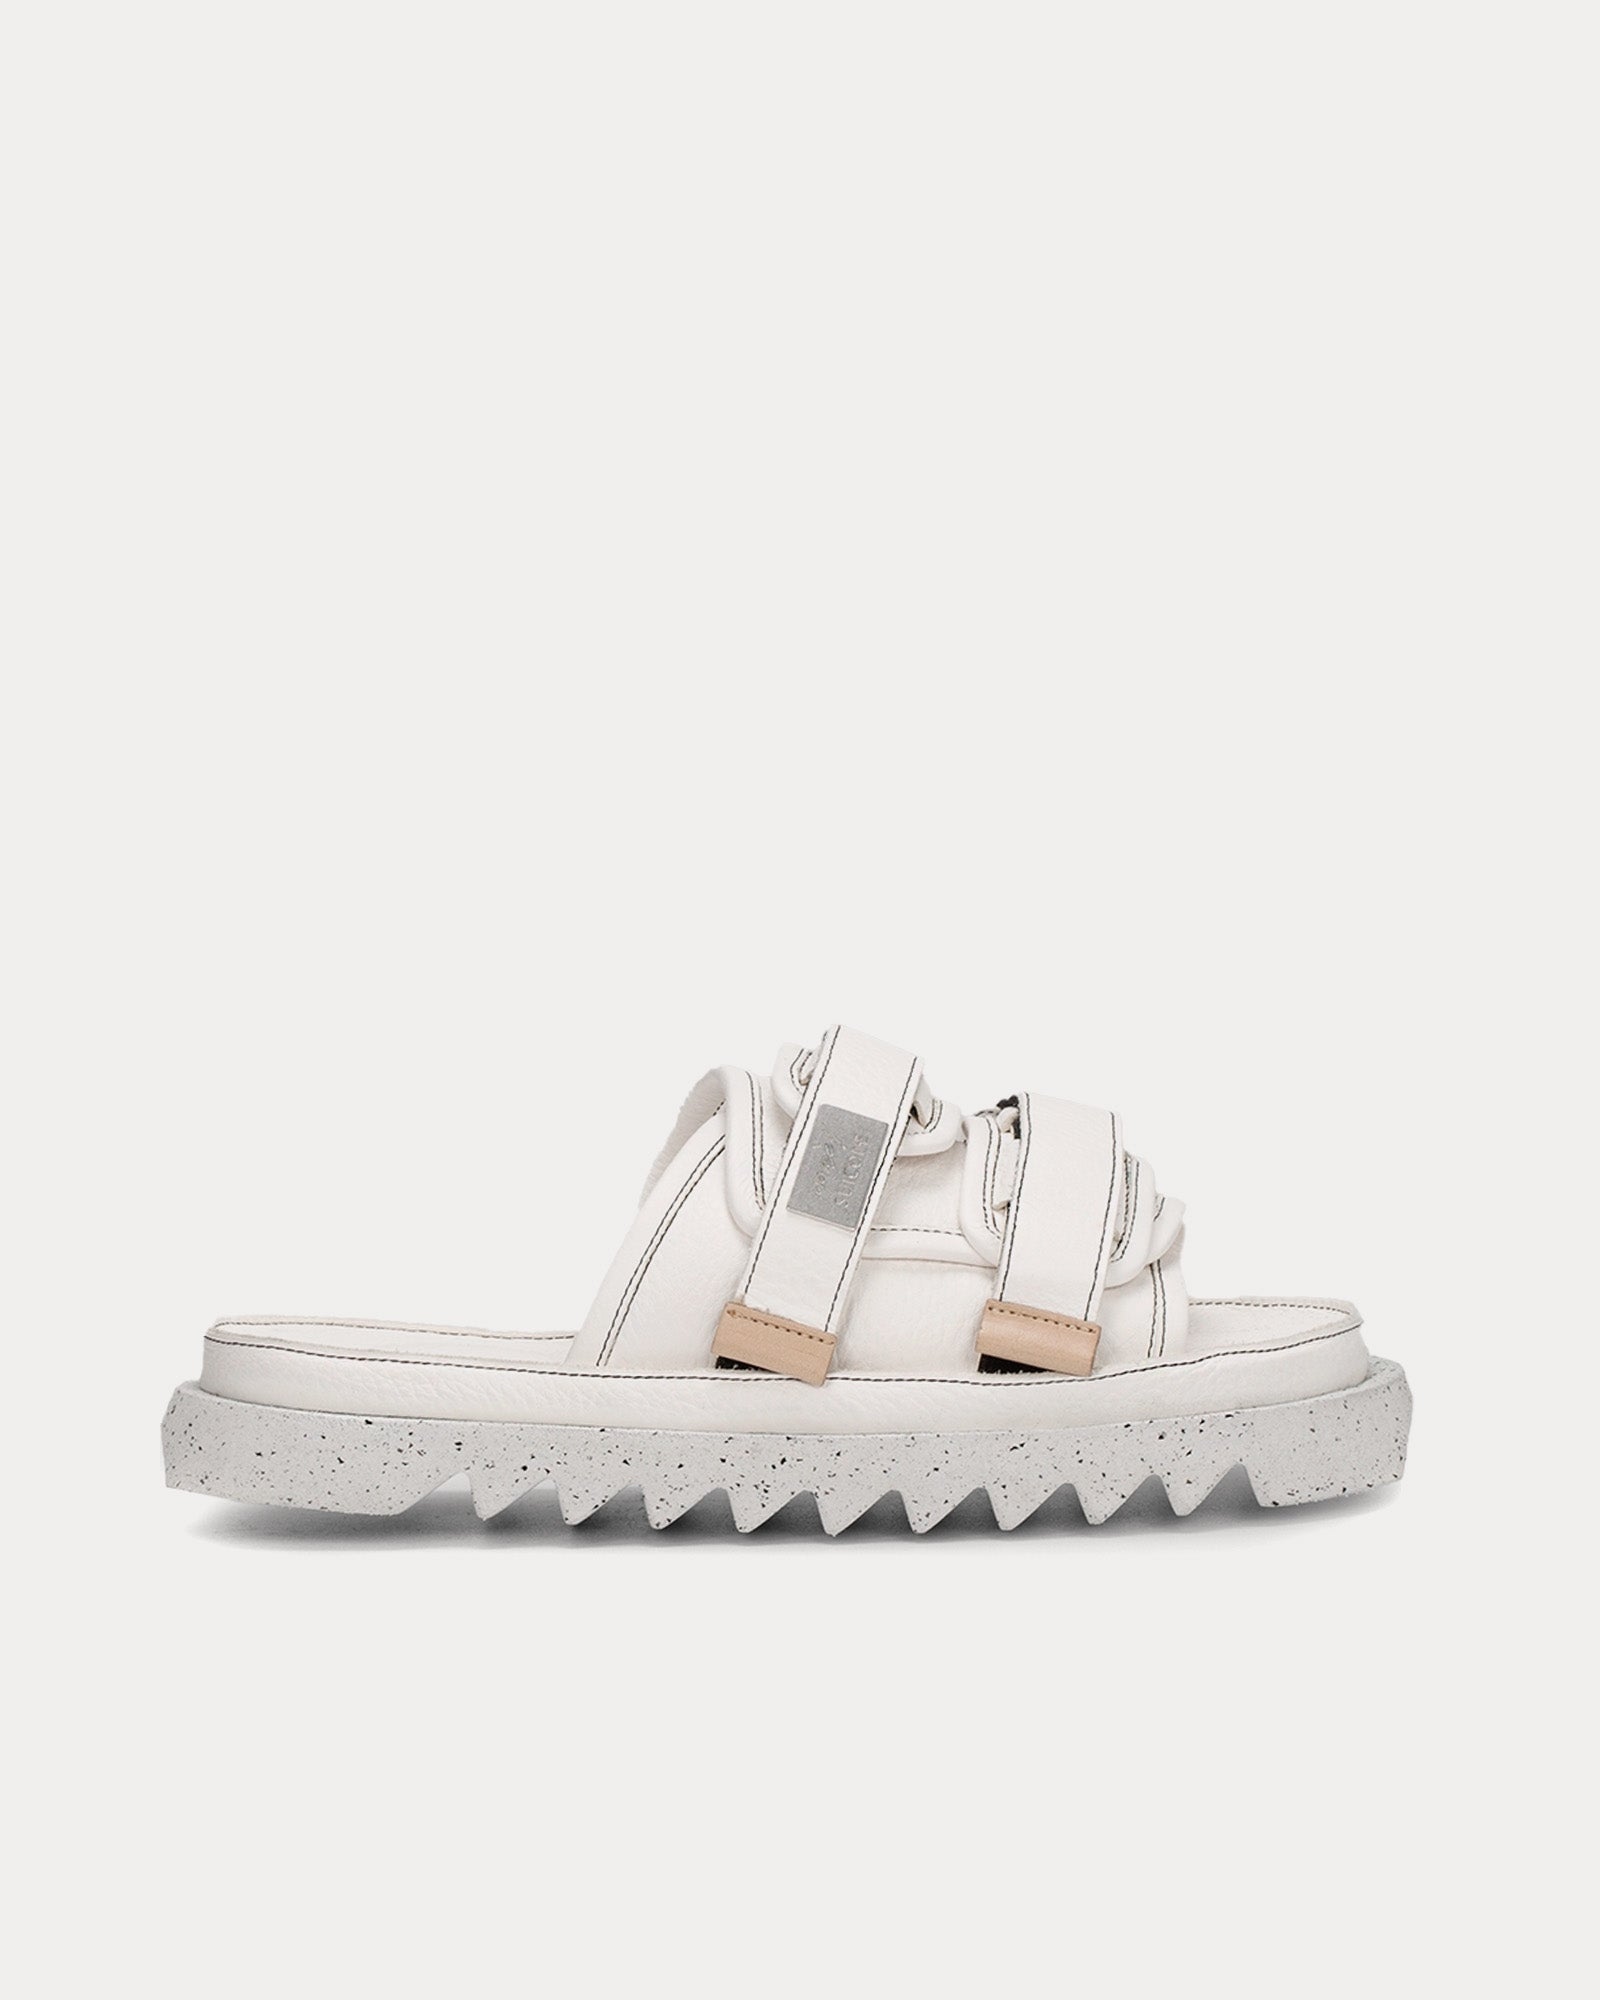 Marsell x Suicoke - Moto Leather Optical White Sandals